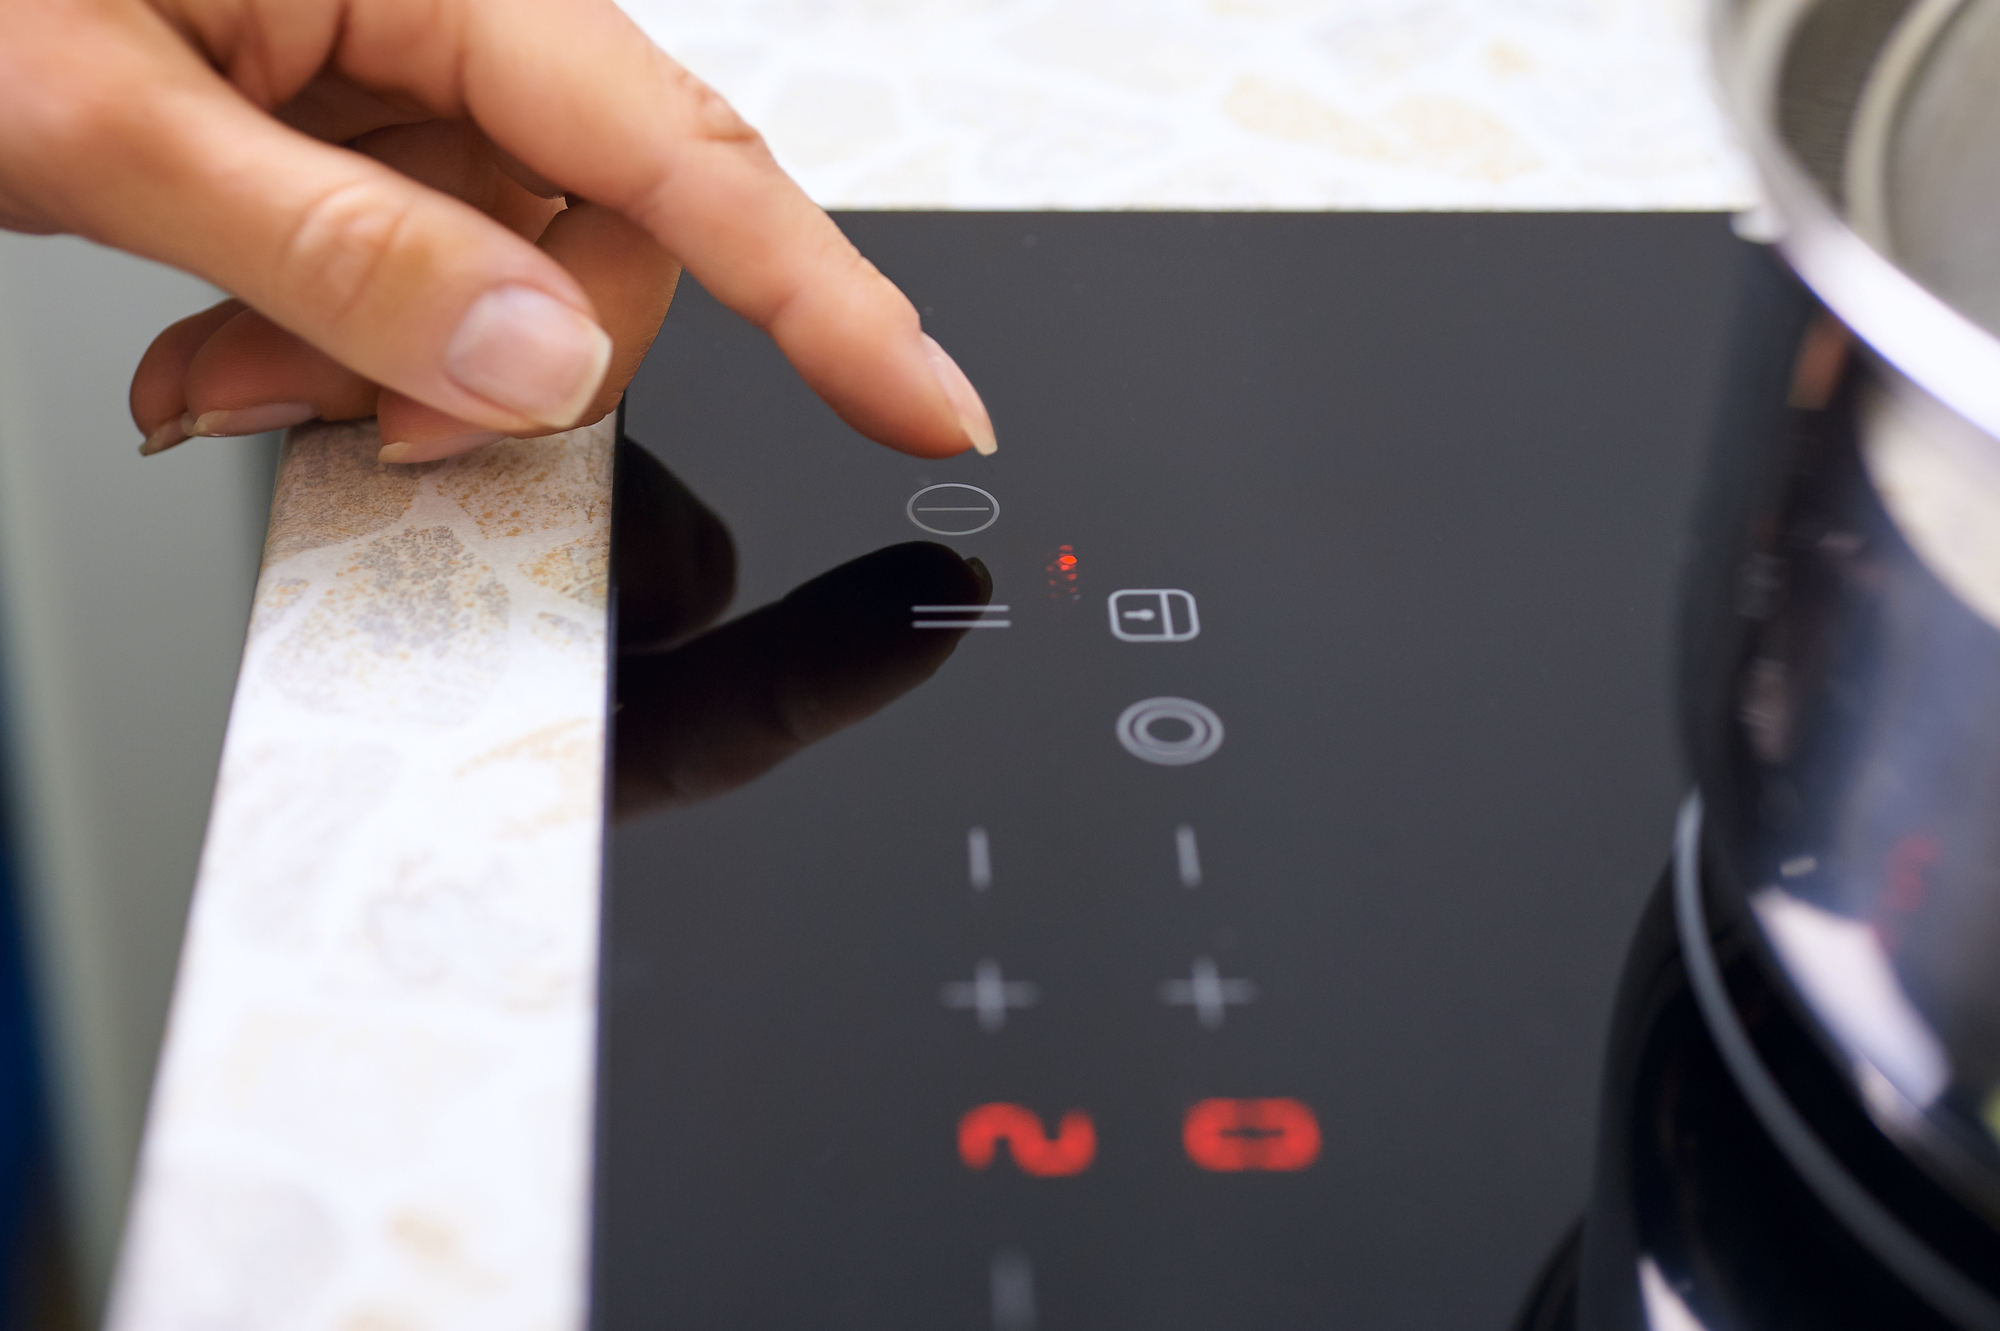 Woman's hand touches controls on includes modern induction stove